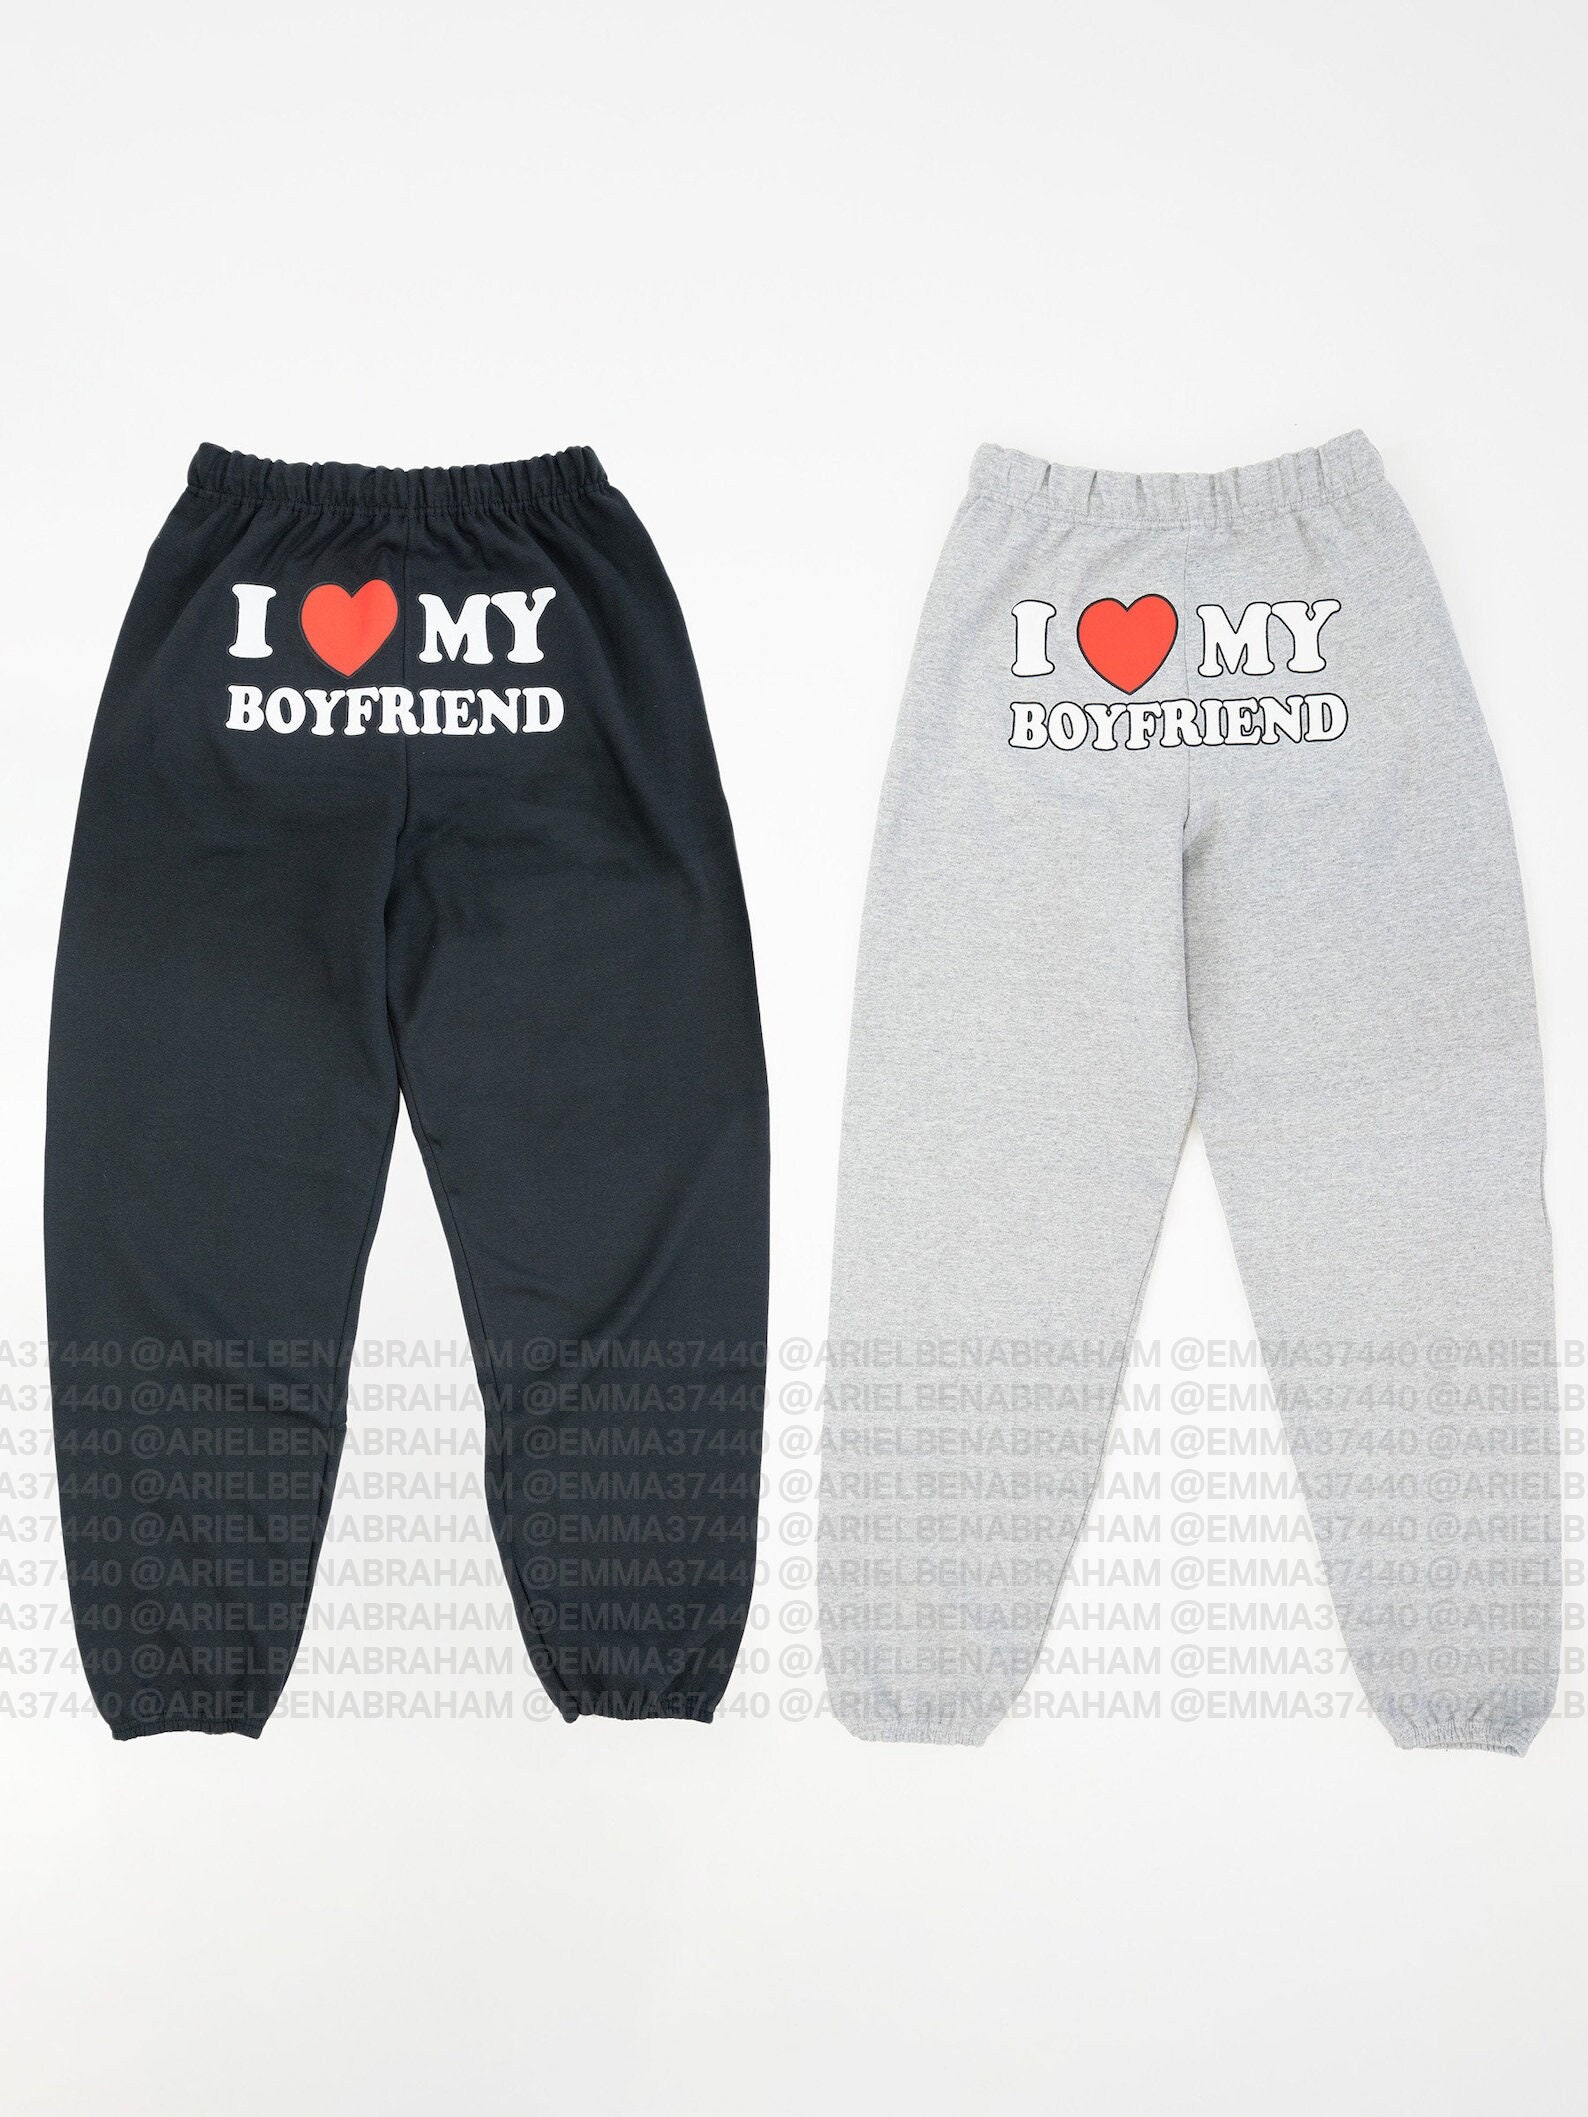 MunLoveDesigns Love You Like A Sunset Trendy Sweatpants Aesthetic Sweatpants Graphic Sweatpants Trendy Joggers Cute Sweatpants Vsco Sweatpants Preppy